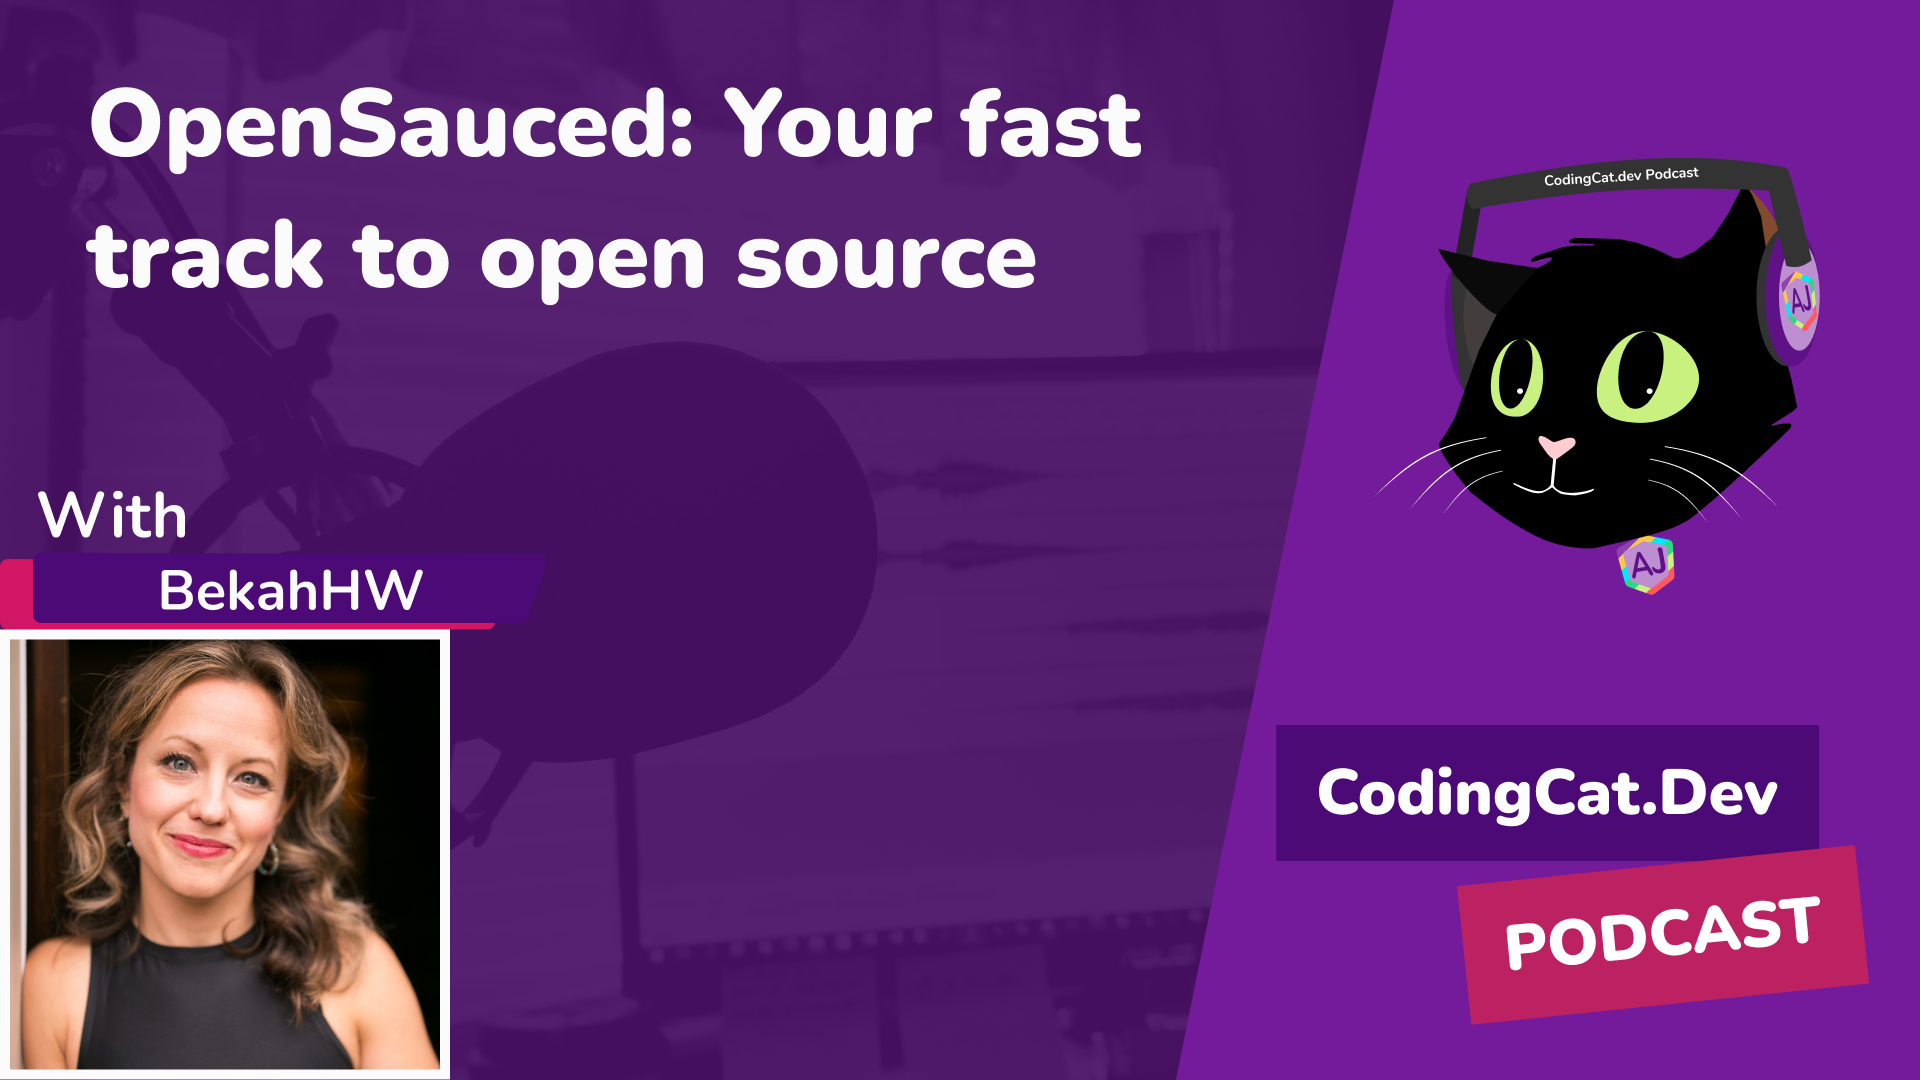 OpenSauced: Your fast track to open source